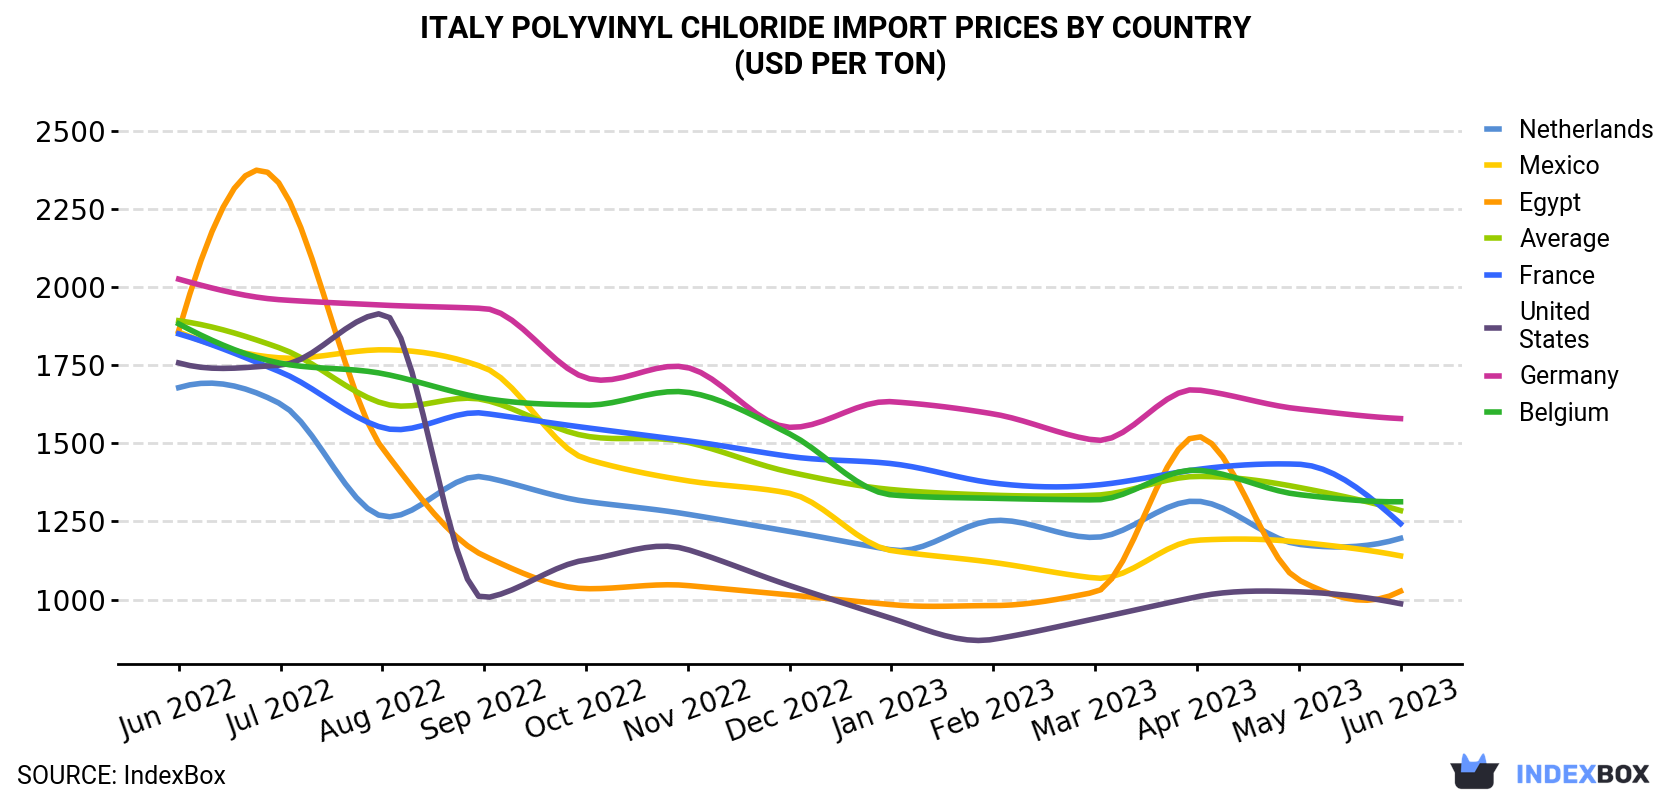 Italy Polyvinyl Chloride Import Prices By Country (USD Per Ton)